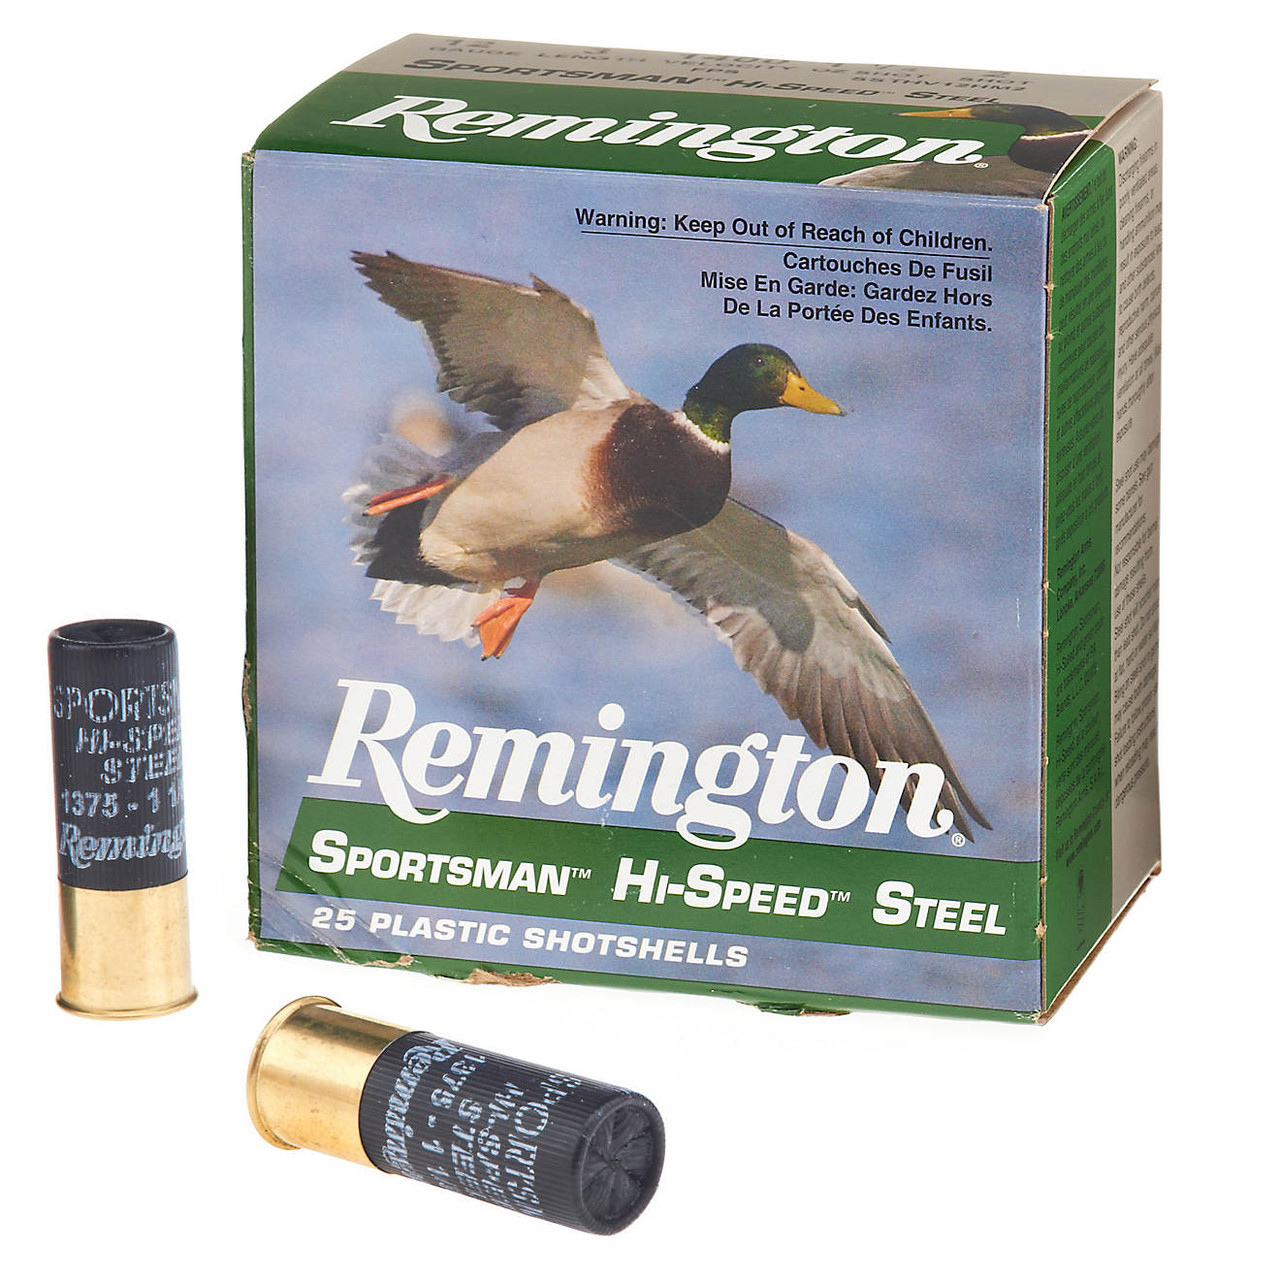 Features and Benefits
12 gauge
2 3/4" shell length
1-1/8 oz. shot
2 shot size
1,375 fps velocity
25-round box
Specifications
Gauge/bore: 12
Hunting - Species: Duck/Goose
Product Type: Shotshell Ammunition
Activity: Hunting
Ounce shot: 1-1/8
Hunting - Shot Type: Steel
Shell length (in.): 2 3/4"
Shot size: 2
What's in the Box
Remington™ Sportsman™ Hi-Speed™ Steel 12 Gauge Shotshells